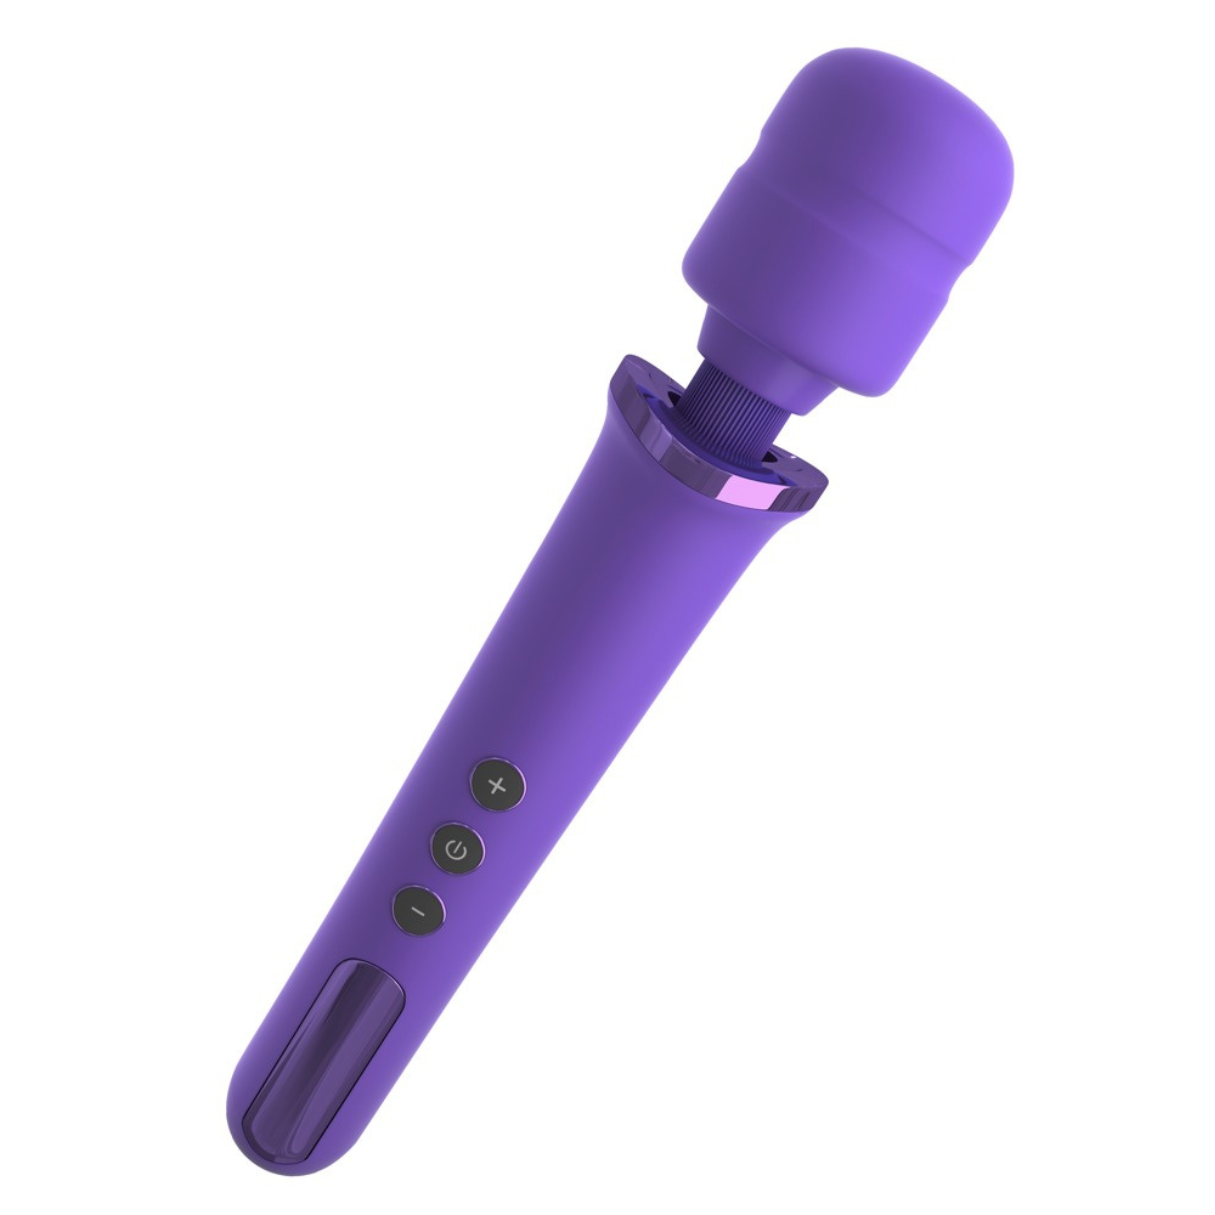 FANTASY FOR HER Rechargeable Power Wand Vibrator